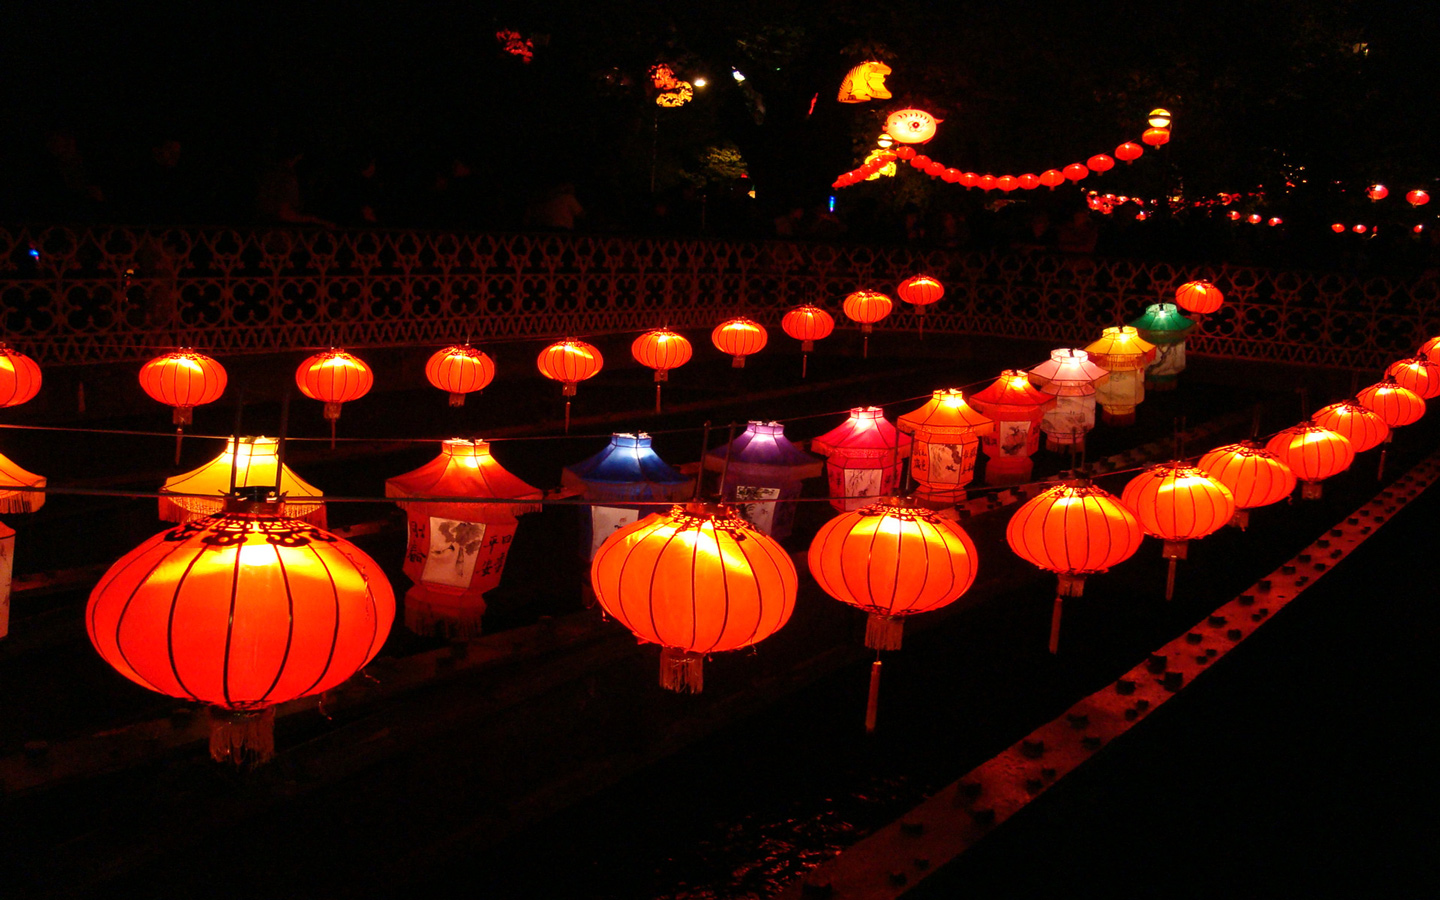  Chinese Lantern Festival computer desktop wallpapers pictures 1440x900